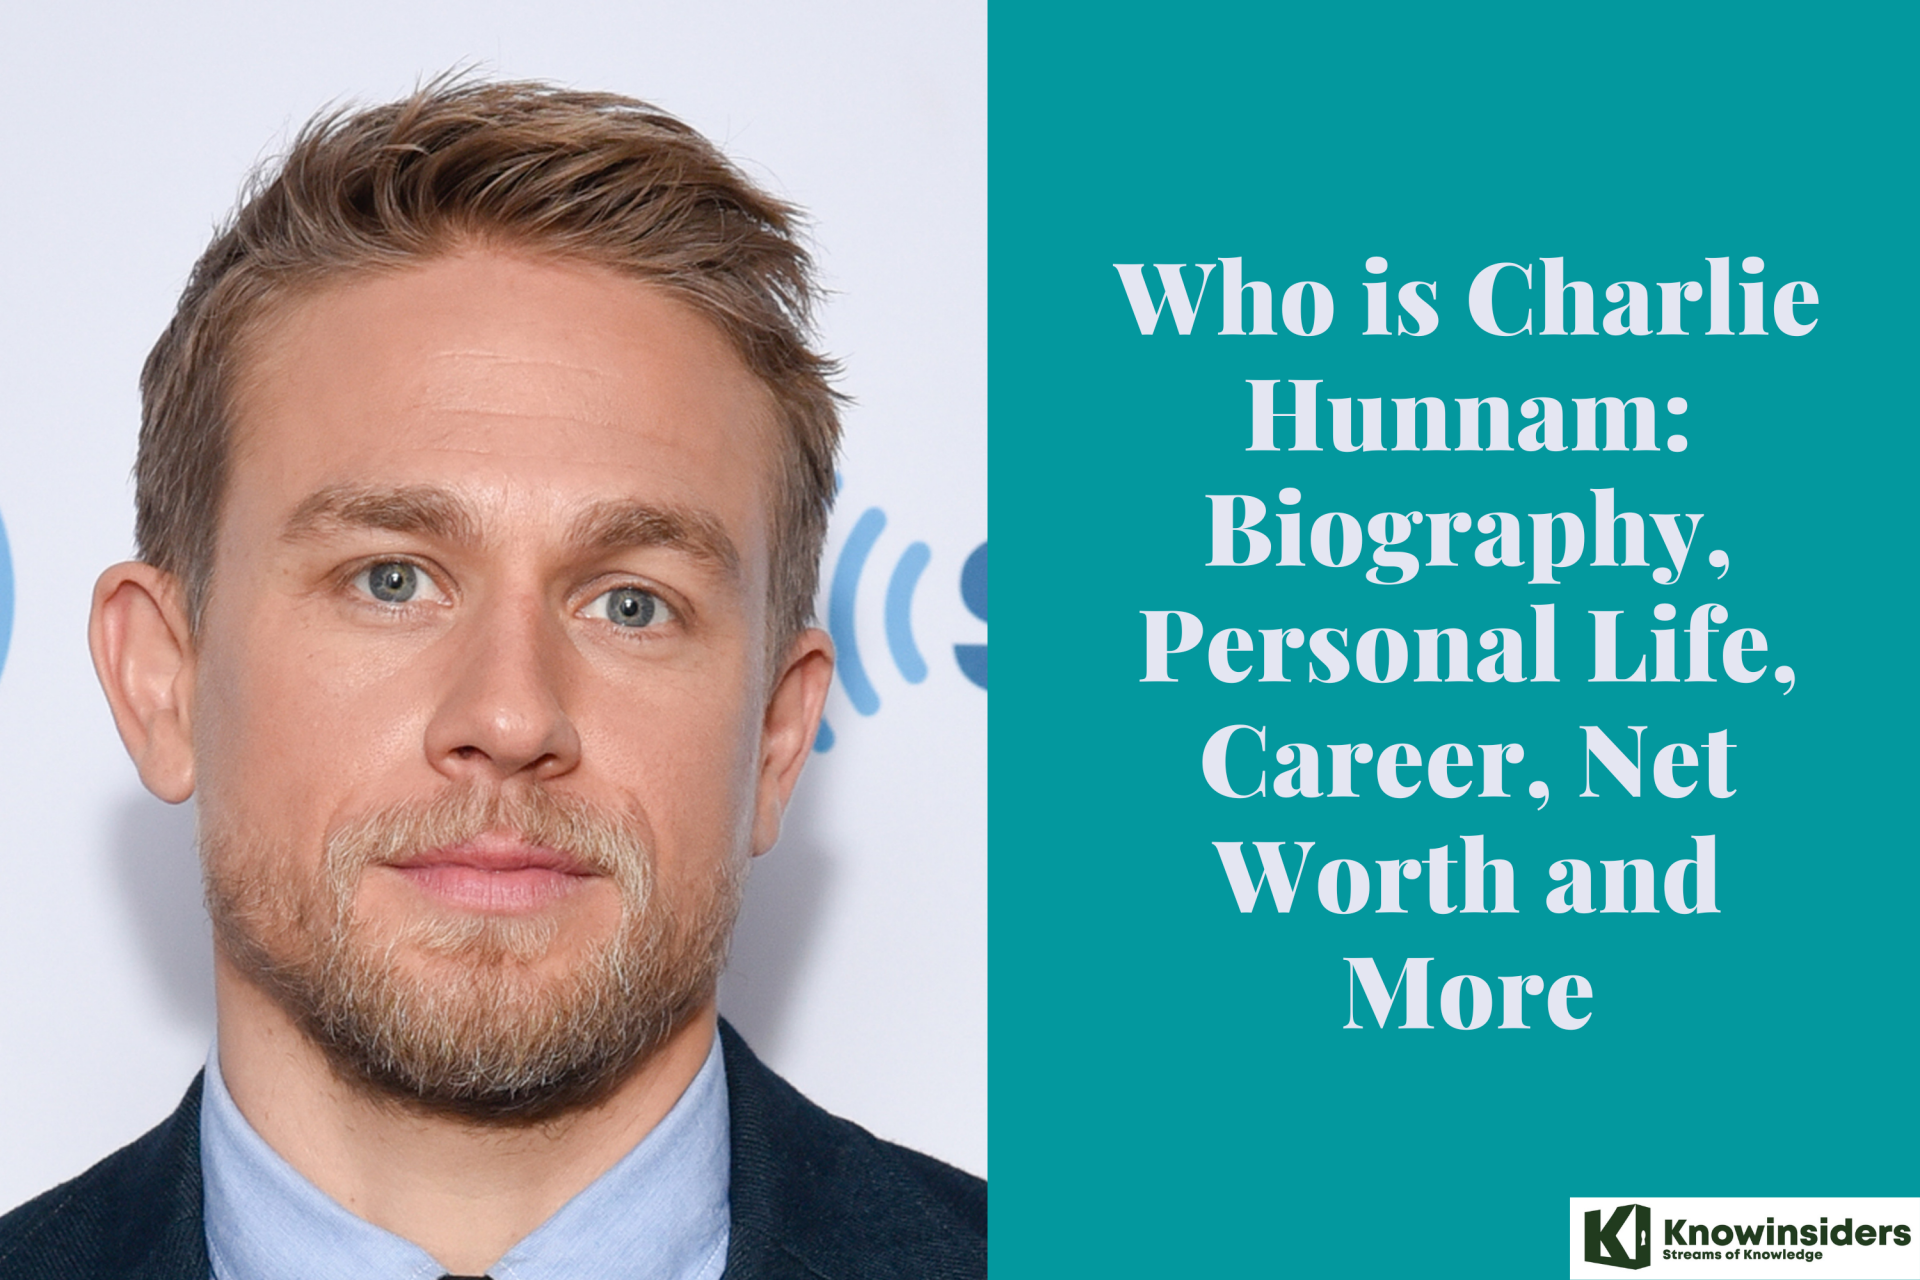 Who is Charlie Hunnam: Biography, Personal Life, Career, Net Worth and More